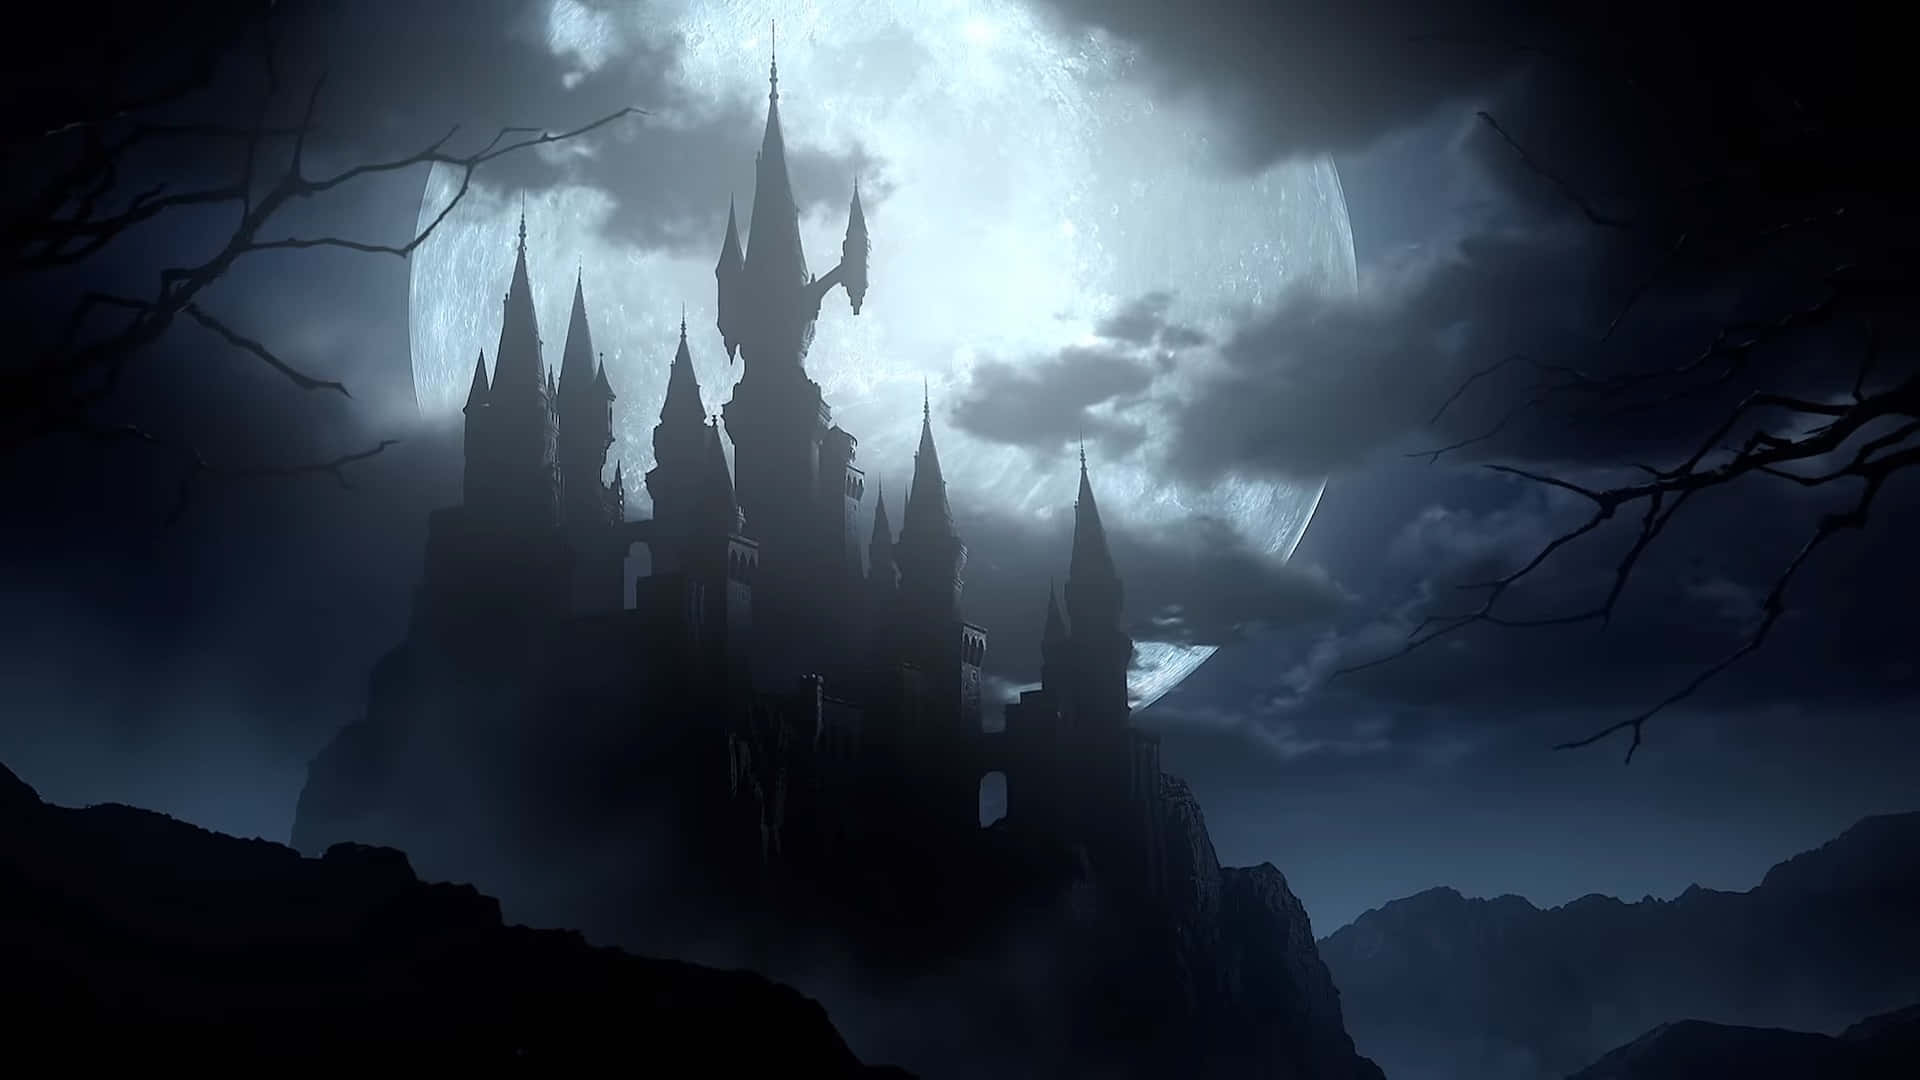 Explore the dark and mysterious world of Castlevania